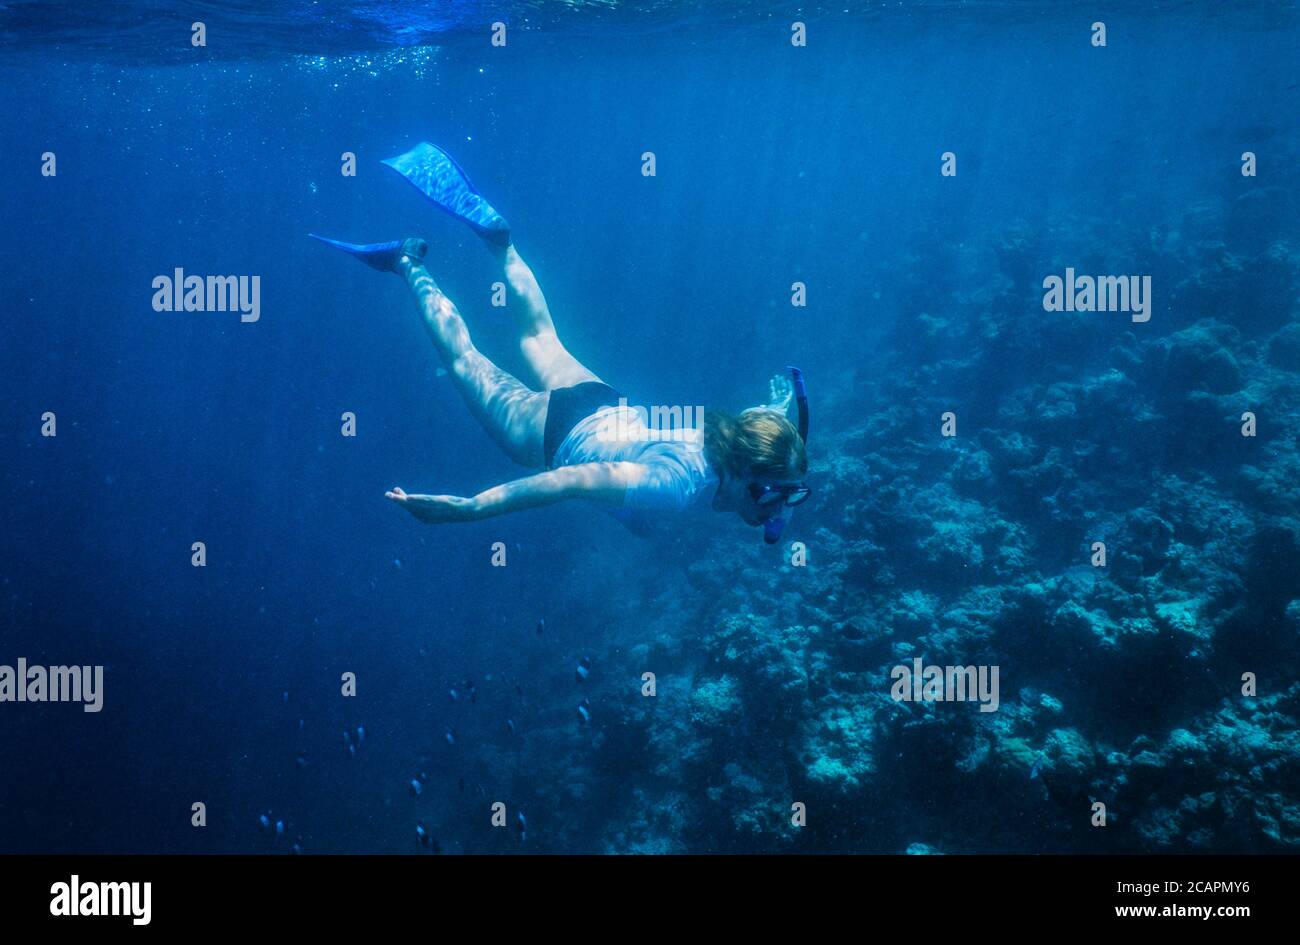 Archive image: woman snorkeller diving down to examine coral bleaching in the Maldives, c. 2005, possibly Ari Atoll. Stock Photo